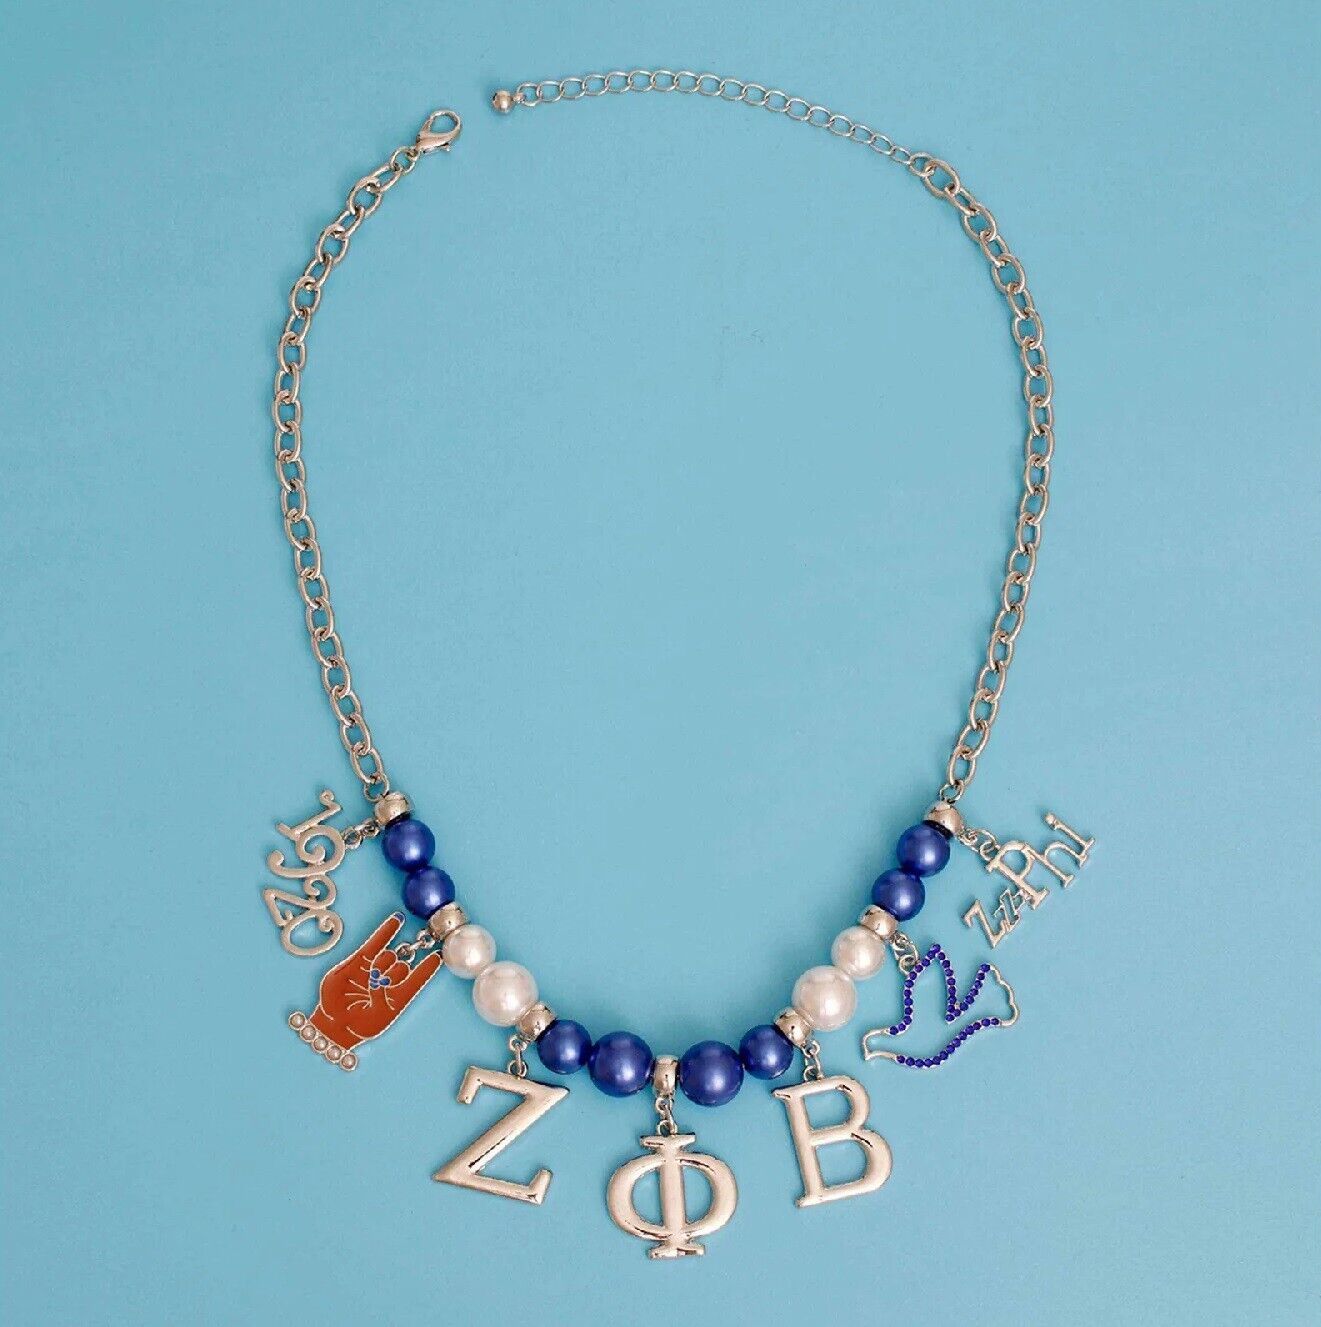 Blue White Pearl Hand, Letters, Dove Charms Silver Oval Cable Fashion Necklace - $49.00